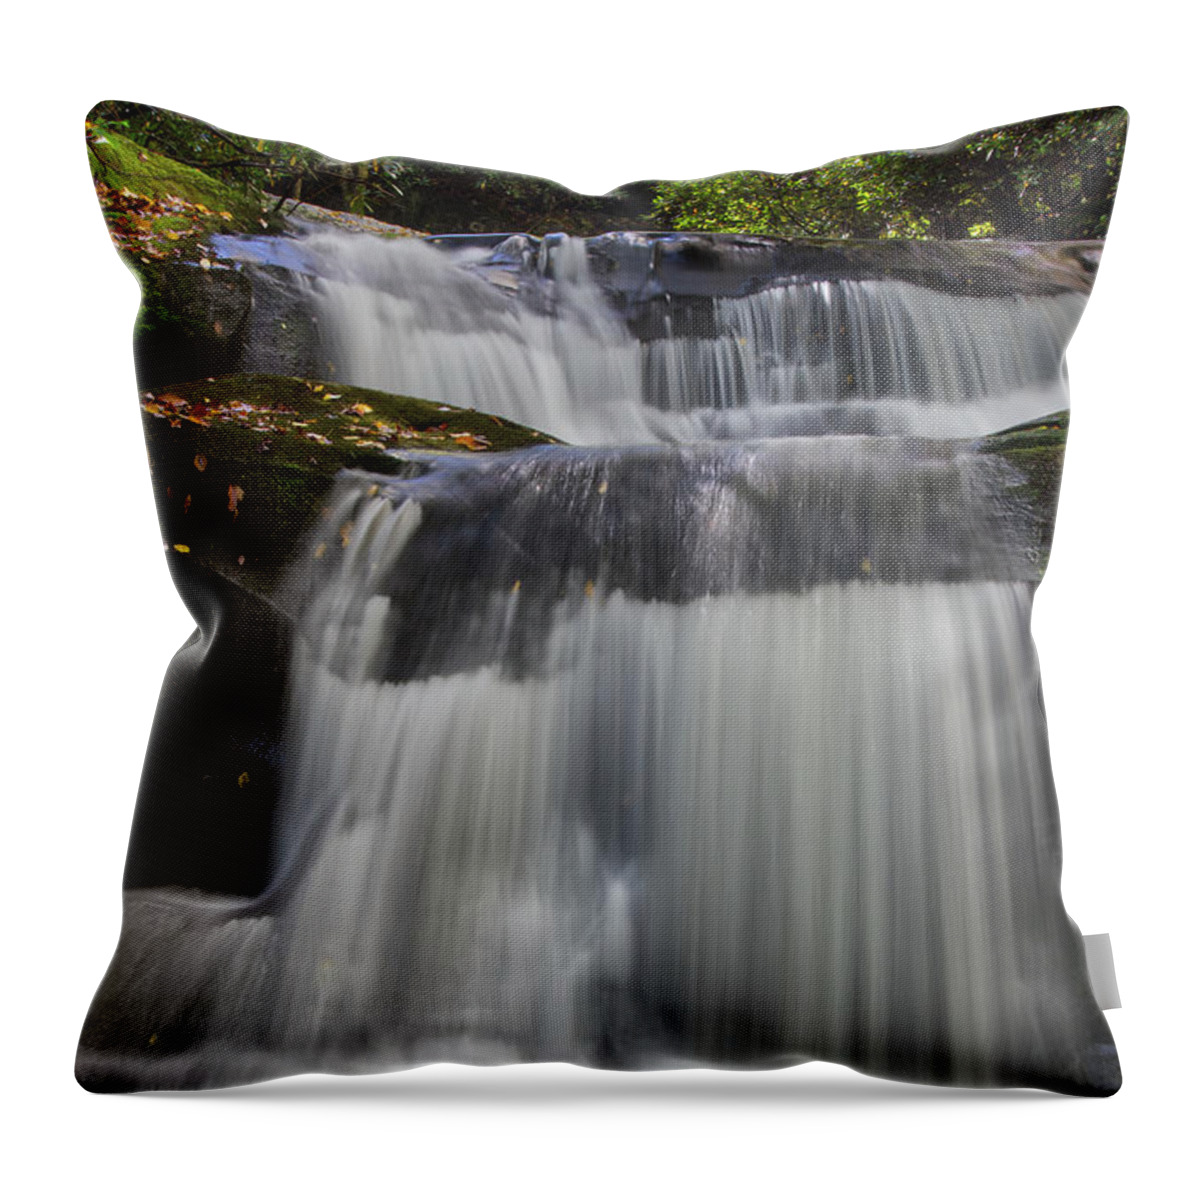 Indian Flats Falls Throw Pillow featuring the photograph Indian Flats Falls 12 by Phil Perkins